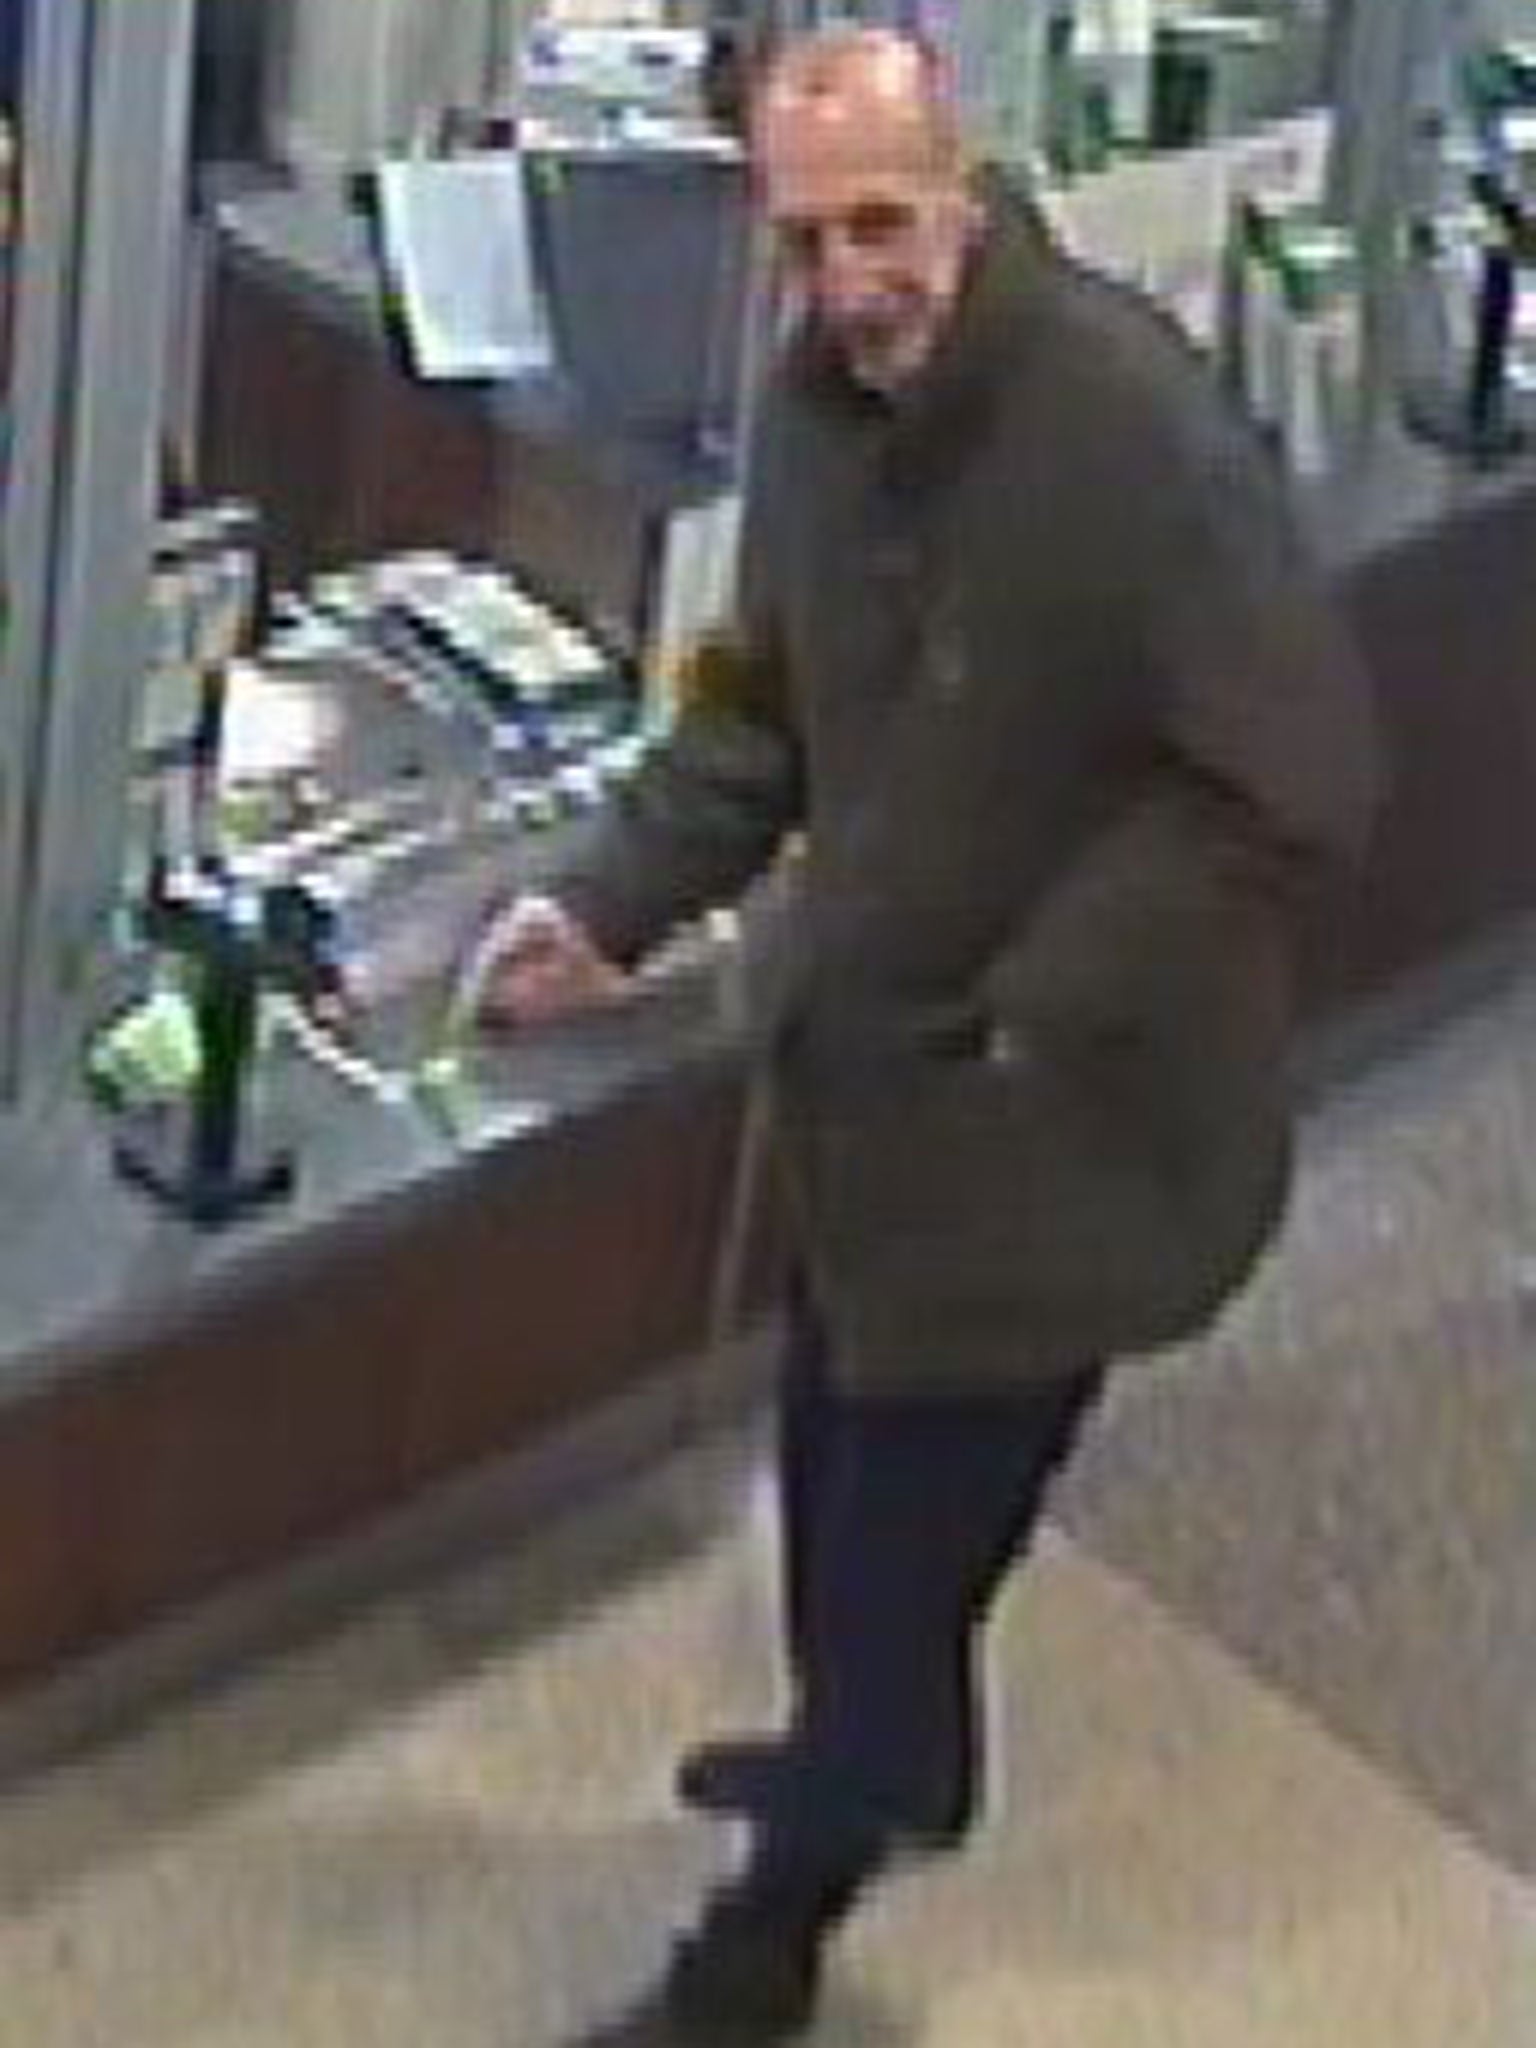 The man caught on CCTV in London